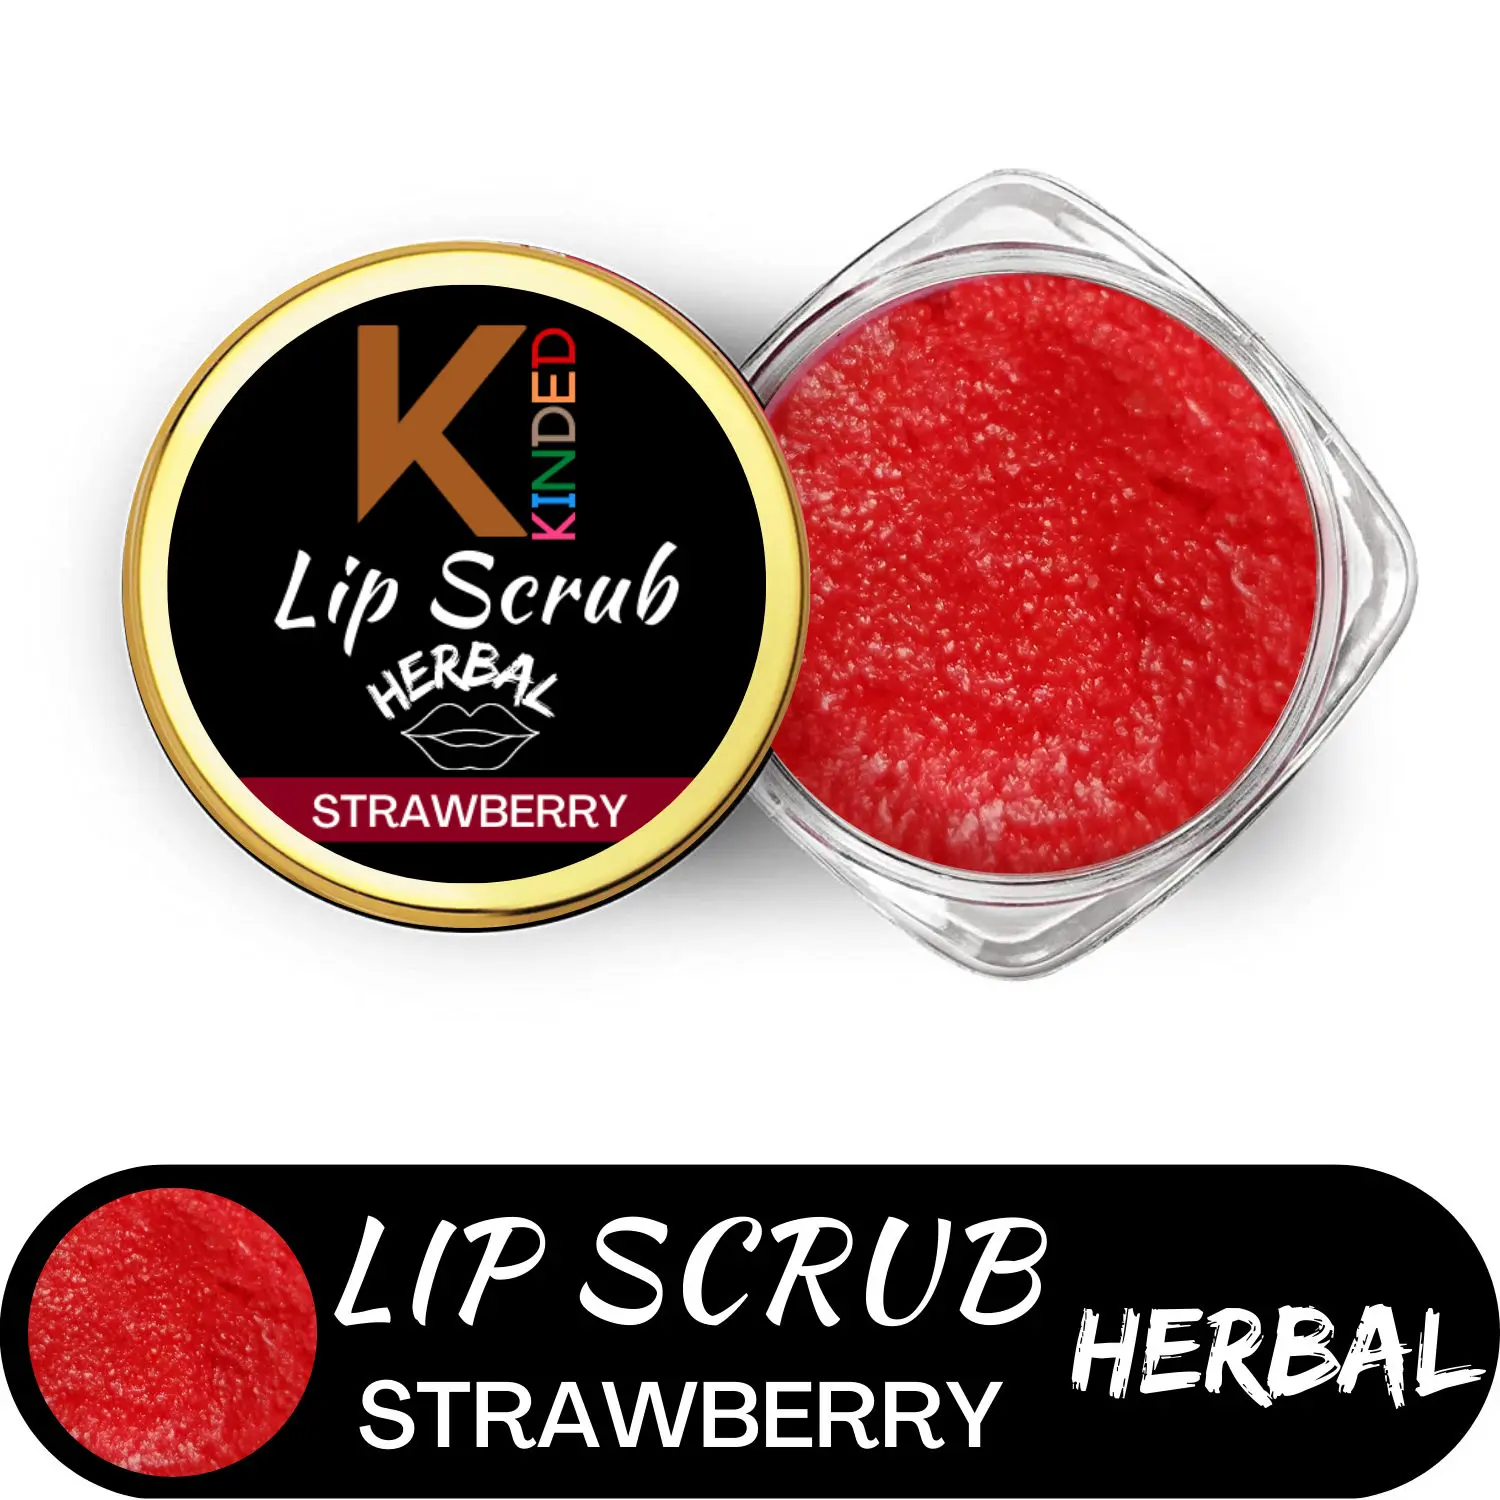 KINDED Lip Sugar Scrub Herbal Natural Essential Oils Exfoliating Balm Polish Scrubber for Men Women Smoked Dry Dark Chapped Lips to Lighten Pigmentation Dead Skin Tan Removal (10 gm, Strawberry)